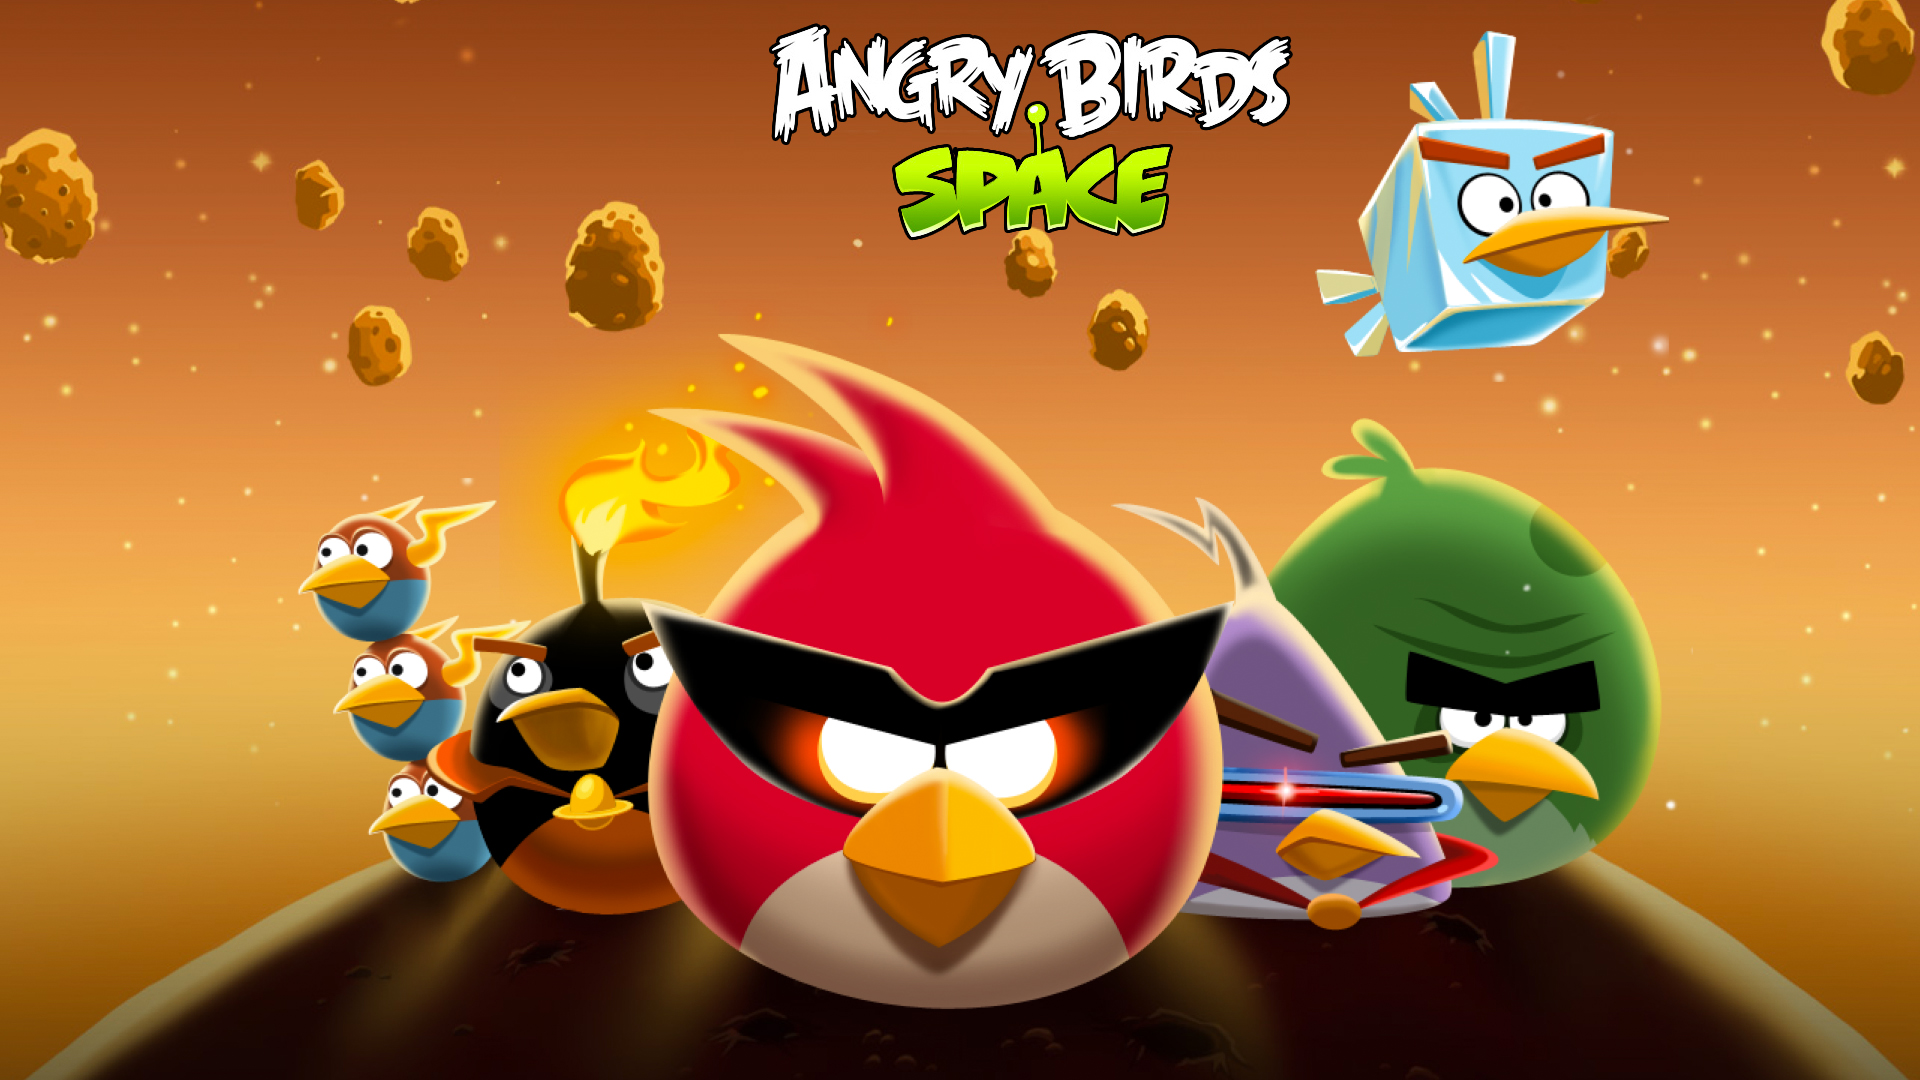 angry birds space wallpaper collection for desktops ipad angry birds 1920x1080